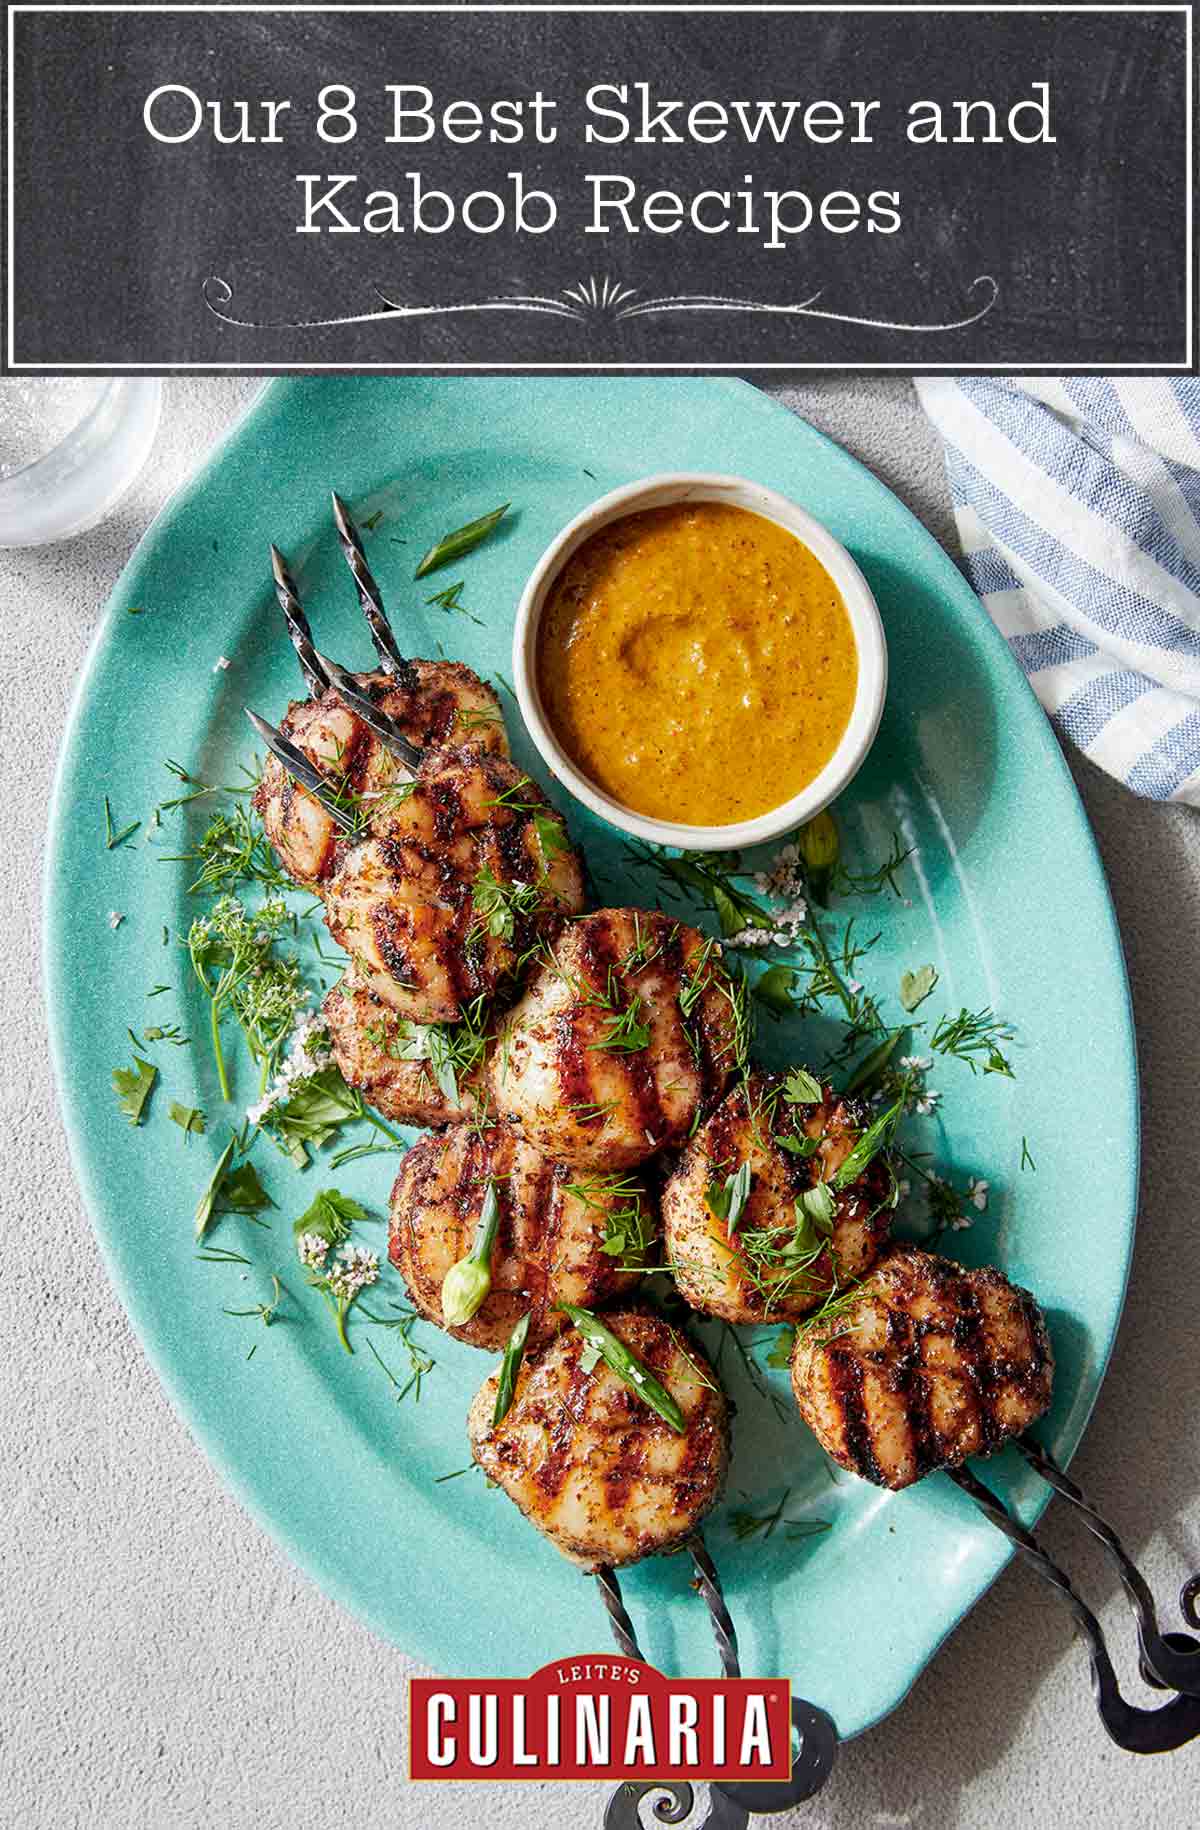 Two skewers of grilled scallops on a aqua platter with a small bowl of sauce on the side.